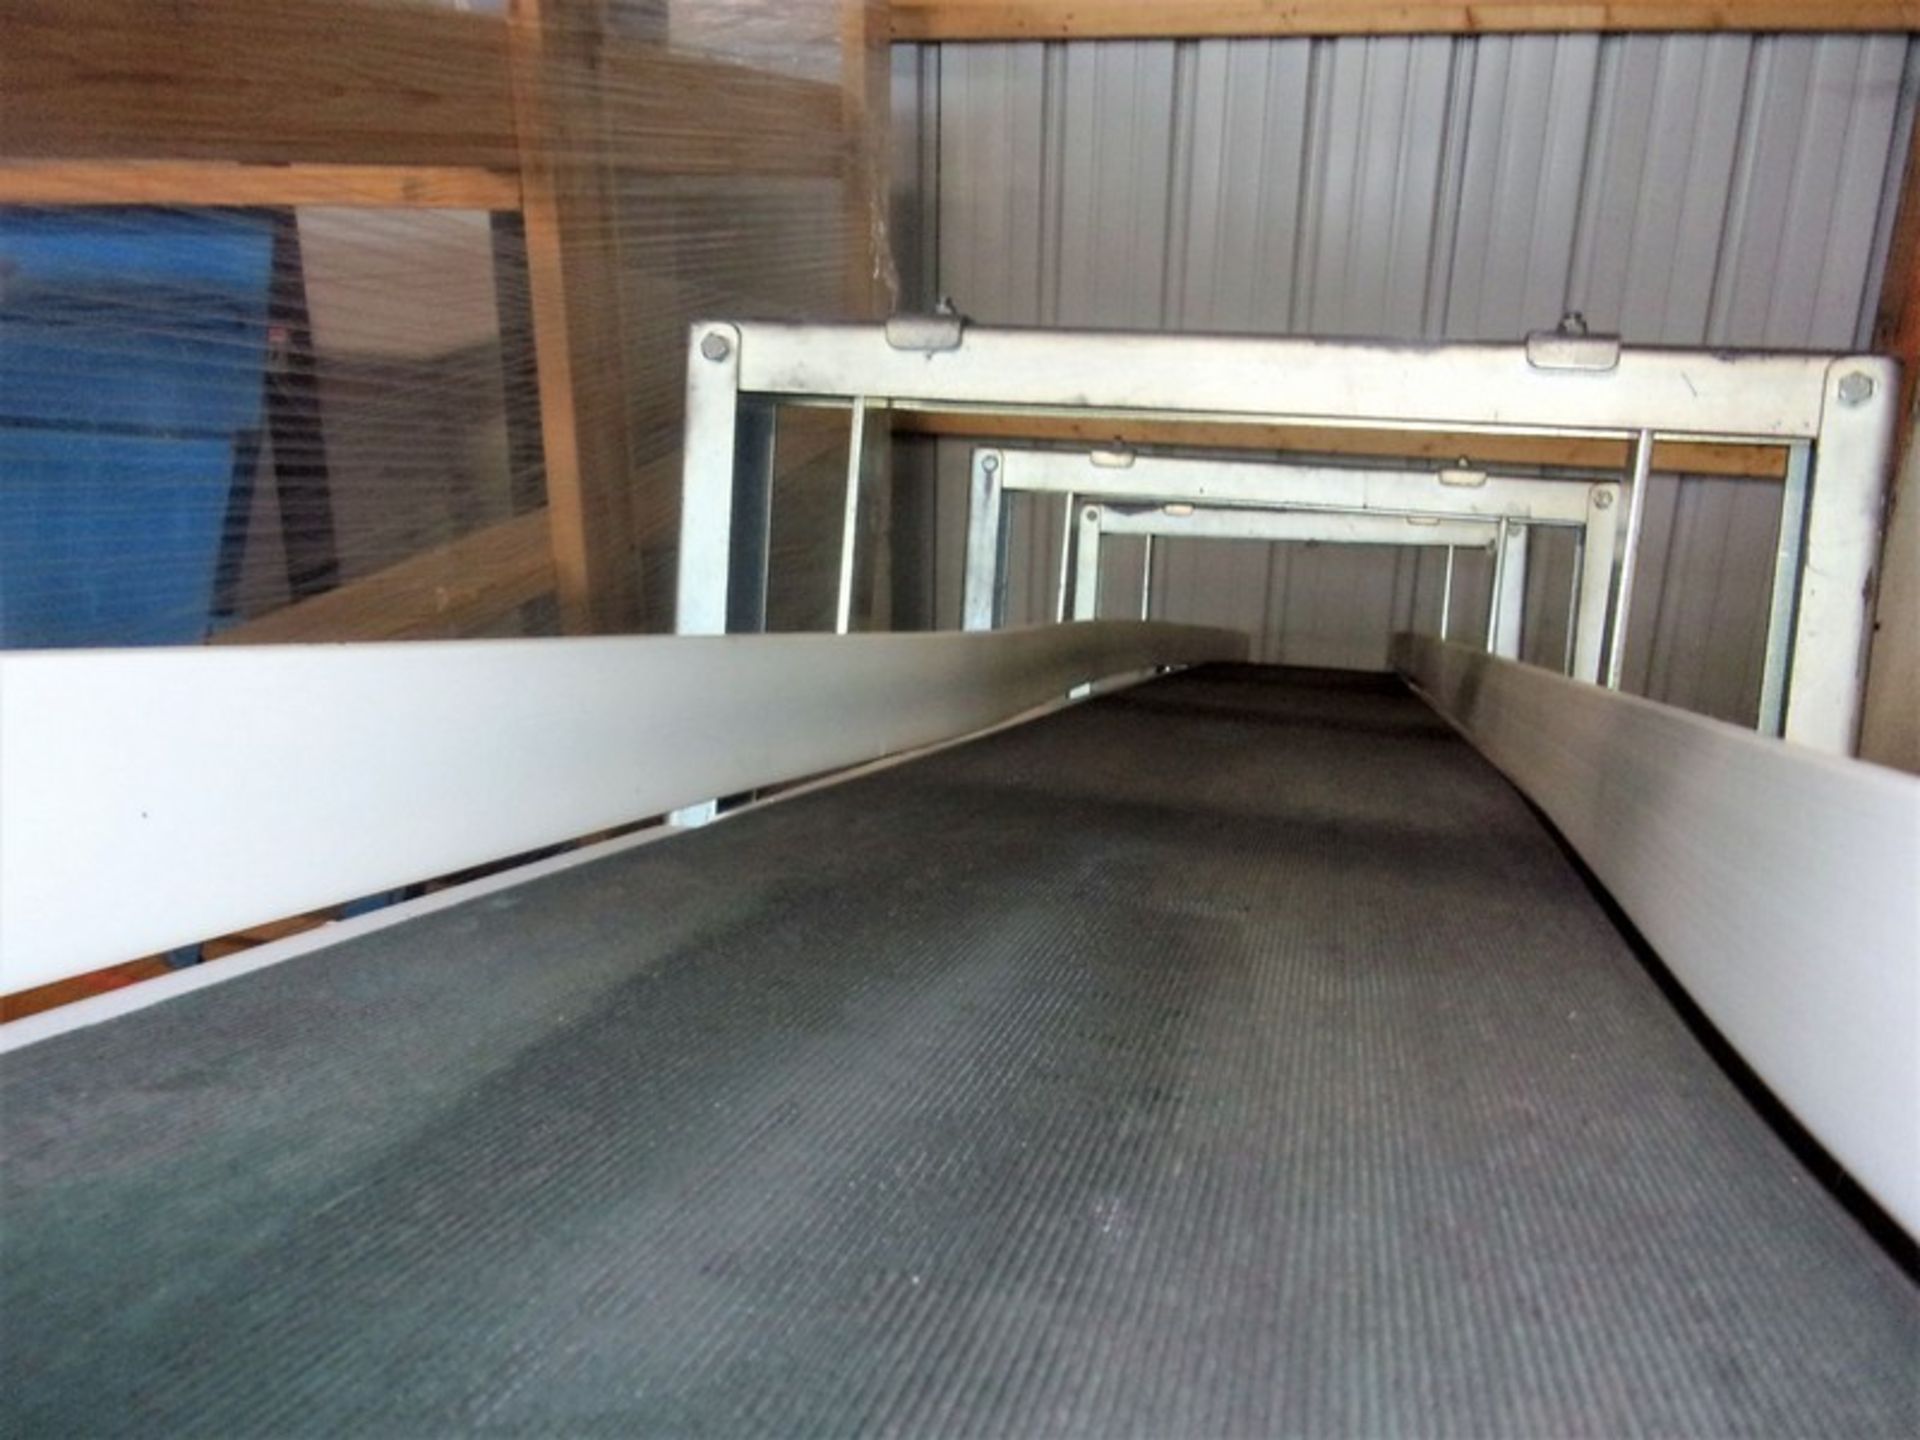 Nercon Incline Belt Conveyor, Aprox. 12 Inch Wide X 123 Inches Long, Infeed Height is 15 Inches, - Image 4 of 10